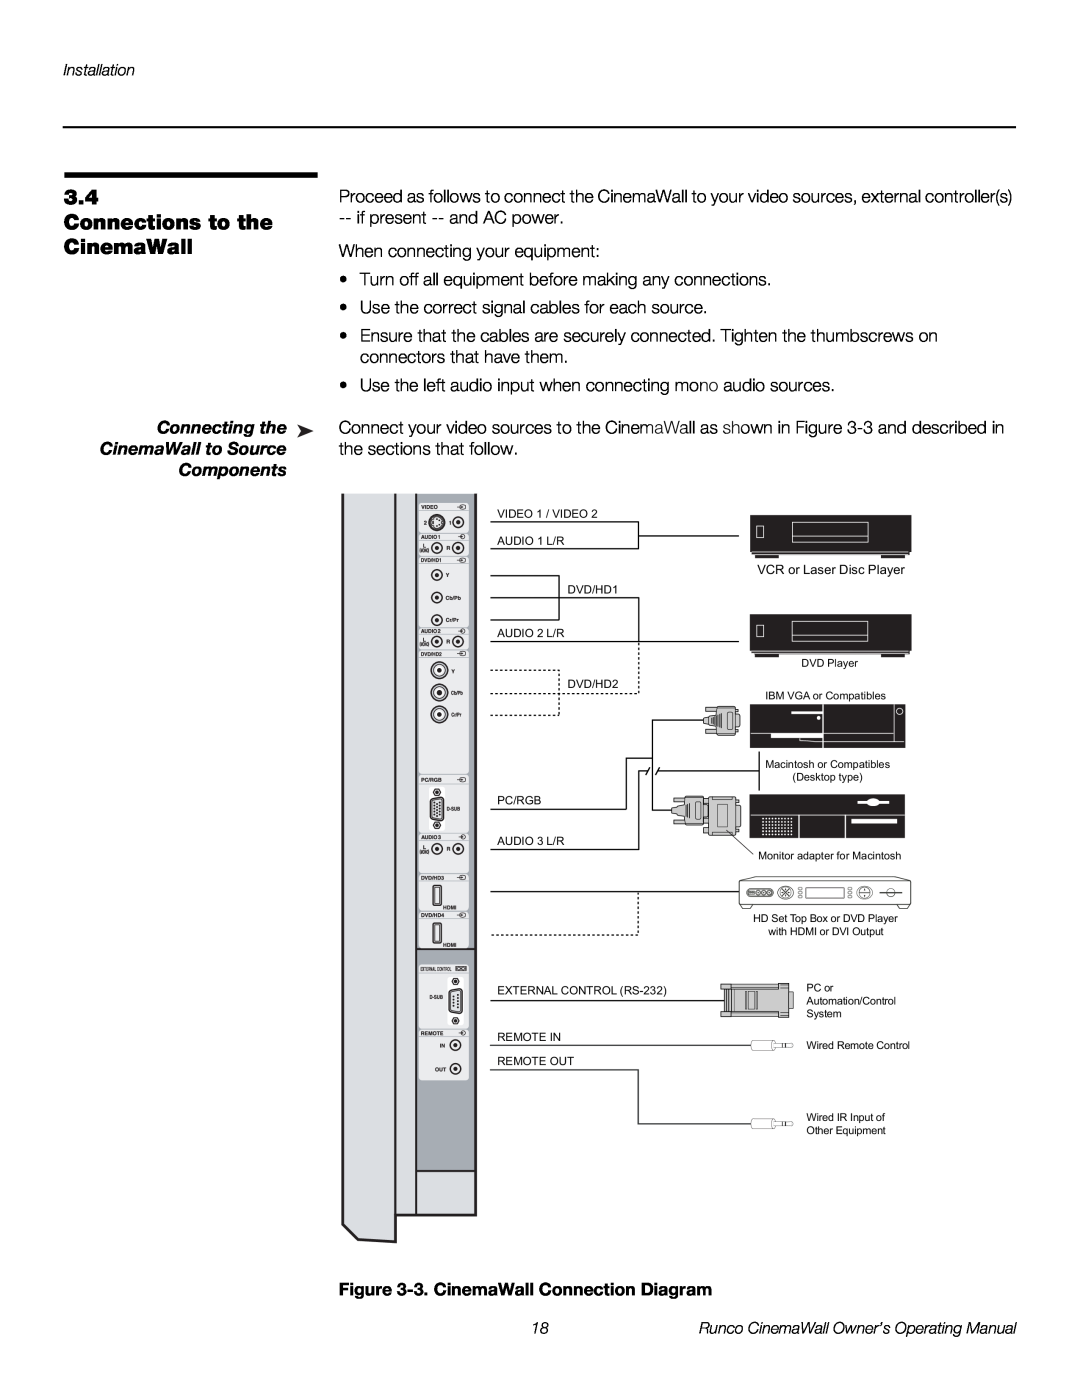 Runco CW-61 Connections to the, Connecting the, CinemaWall to Source, Components, 3. CinemaWall Connection Diagram 